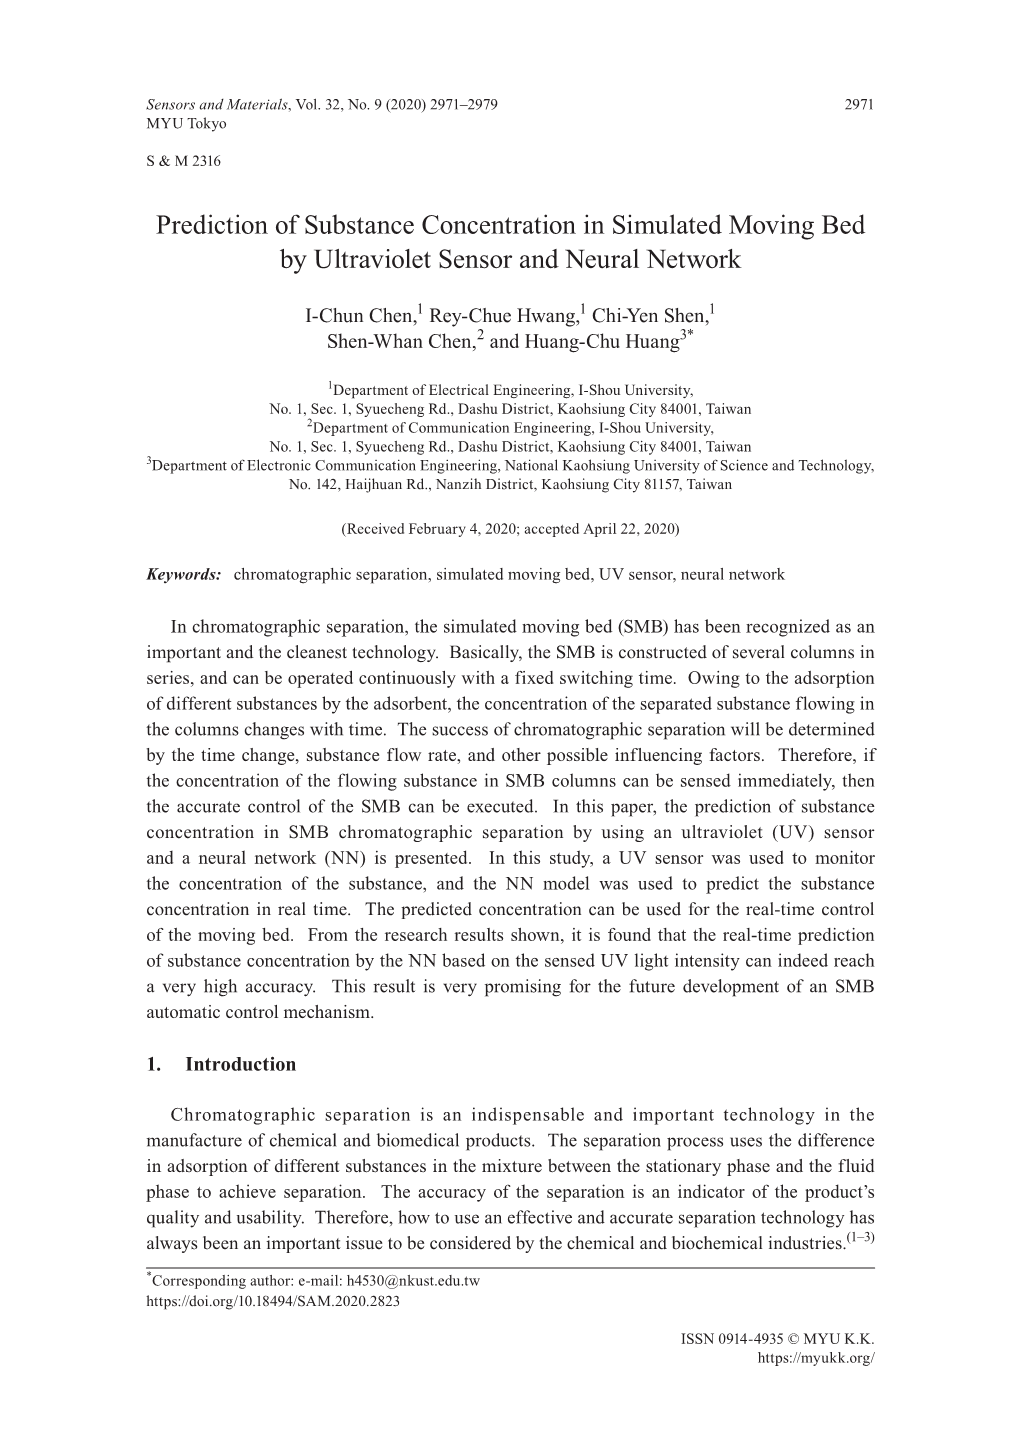 Prediction of Substance Concentration in Simulated Moving Bed by Ultraviolet Sensor and Neural Network